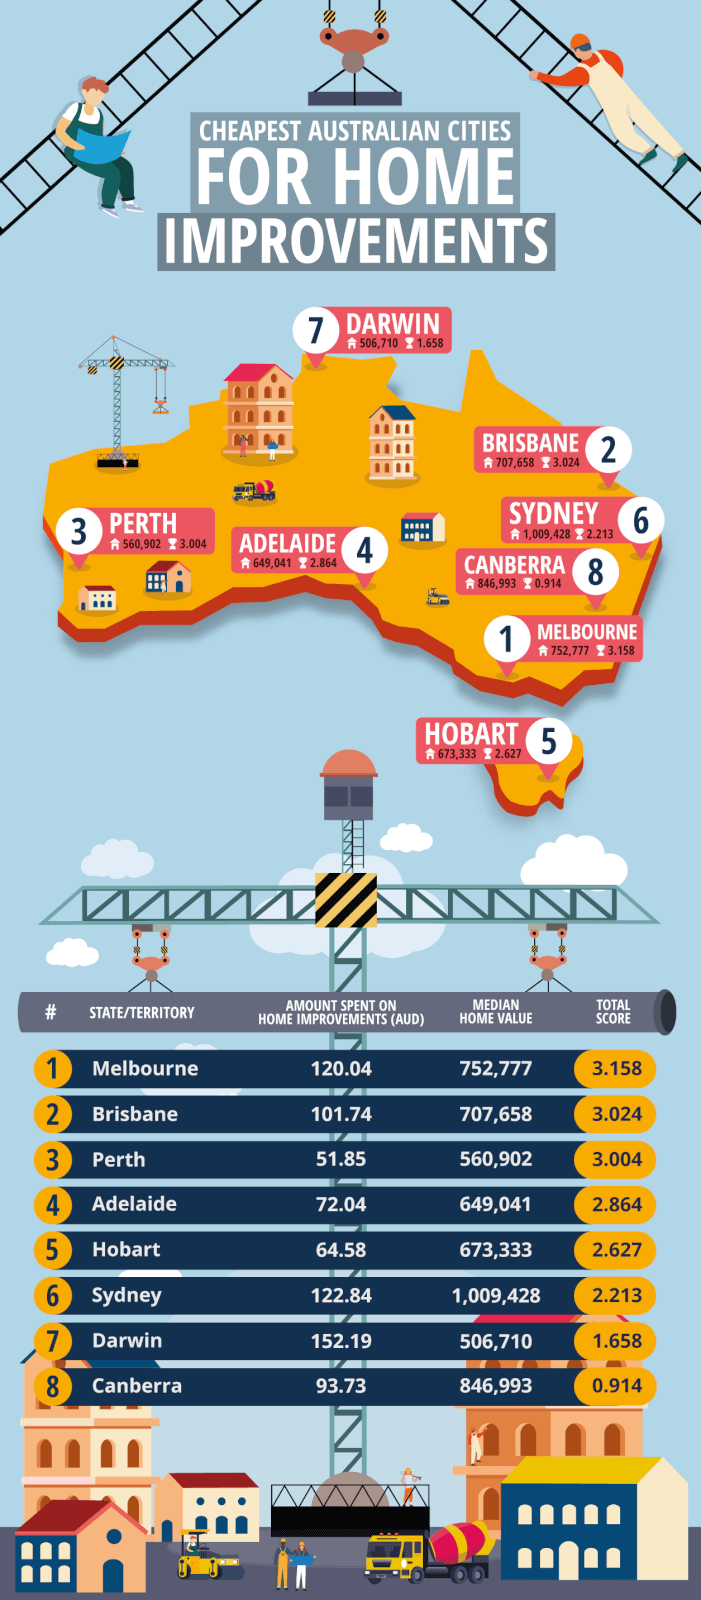 Map of Australia showing the ranking of the best citites for home improvements. 